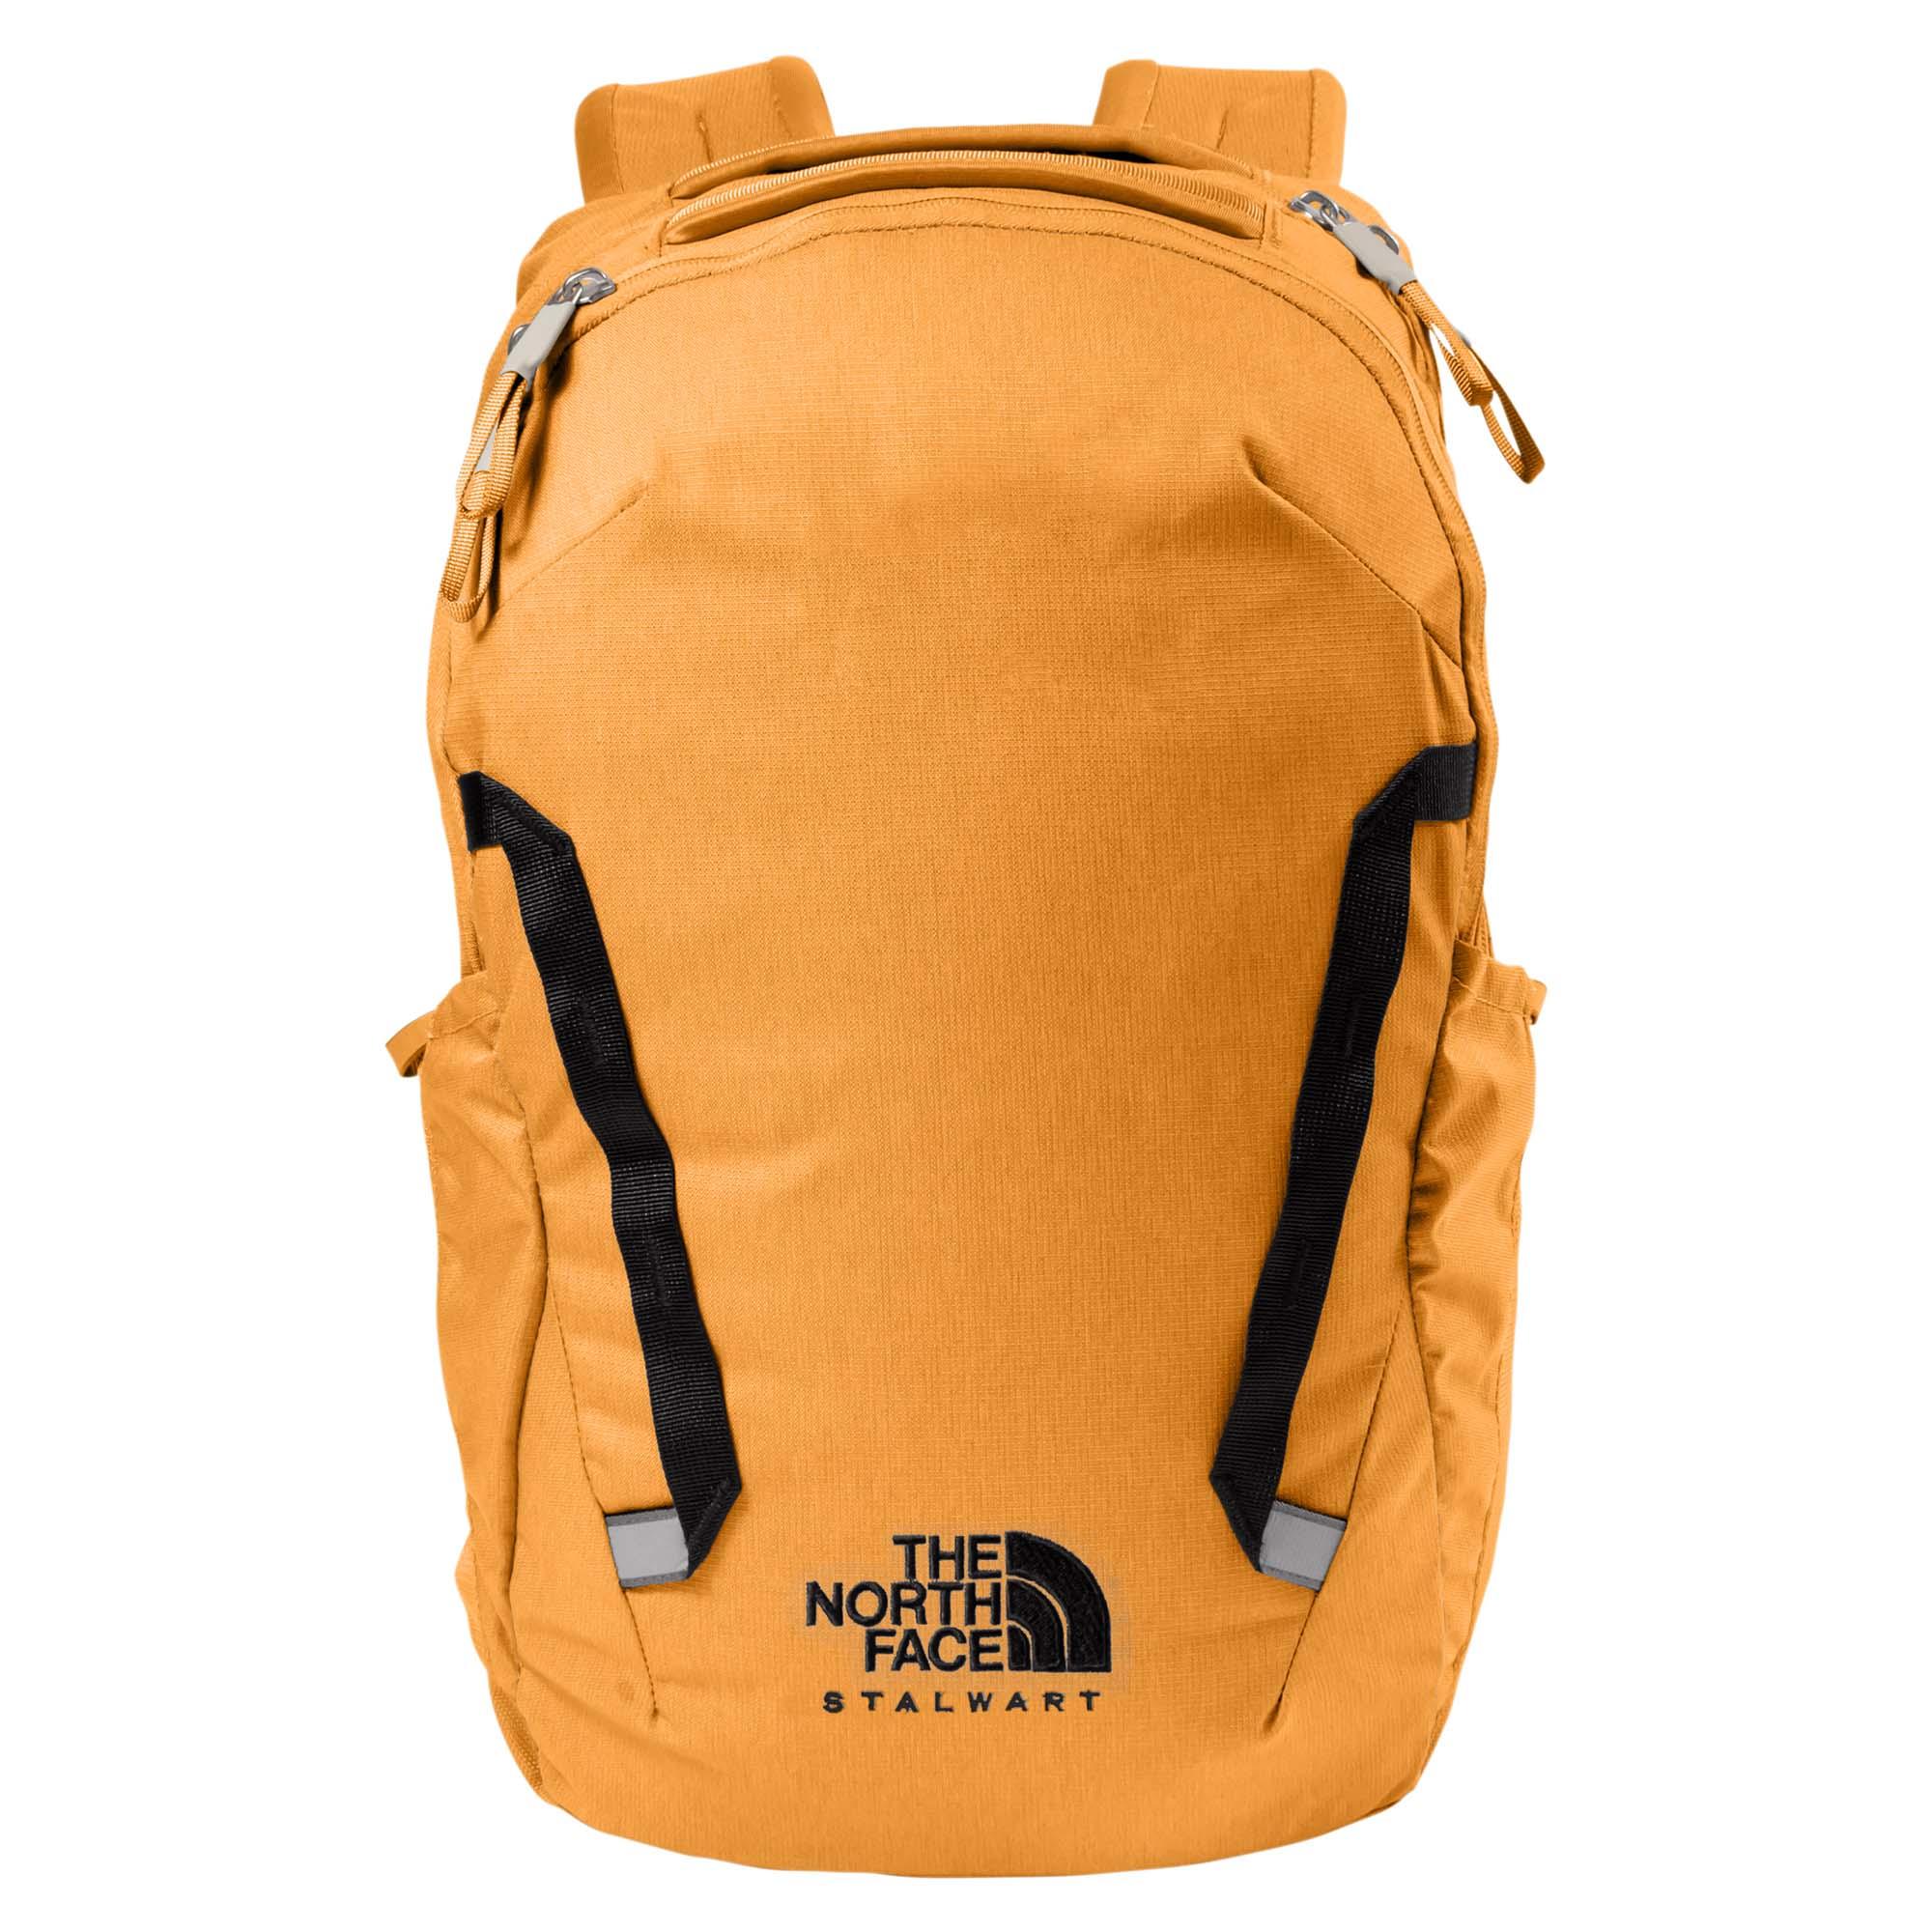 The North Face NF0A52S6 Stalwart Backpack - Timber Tan | Full Source